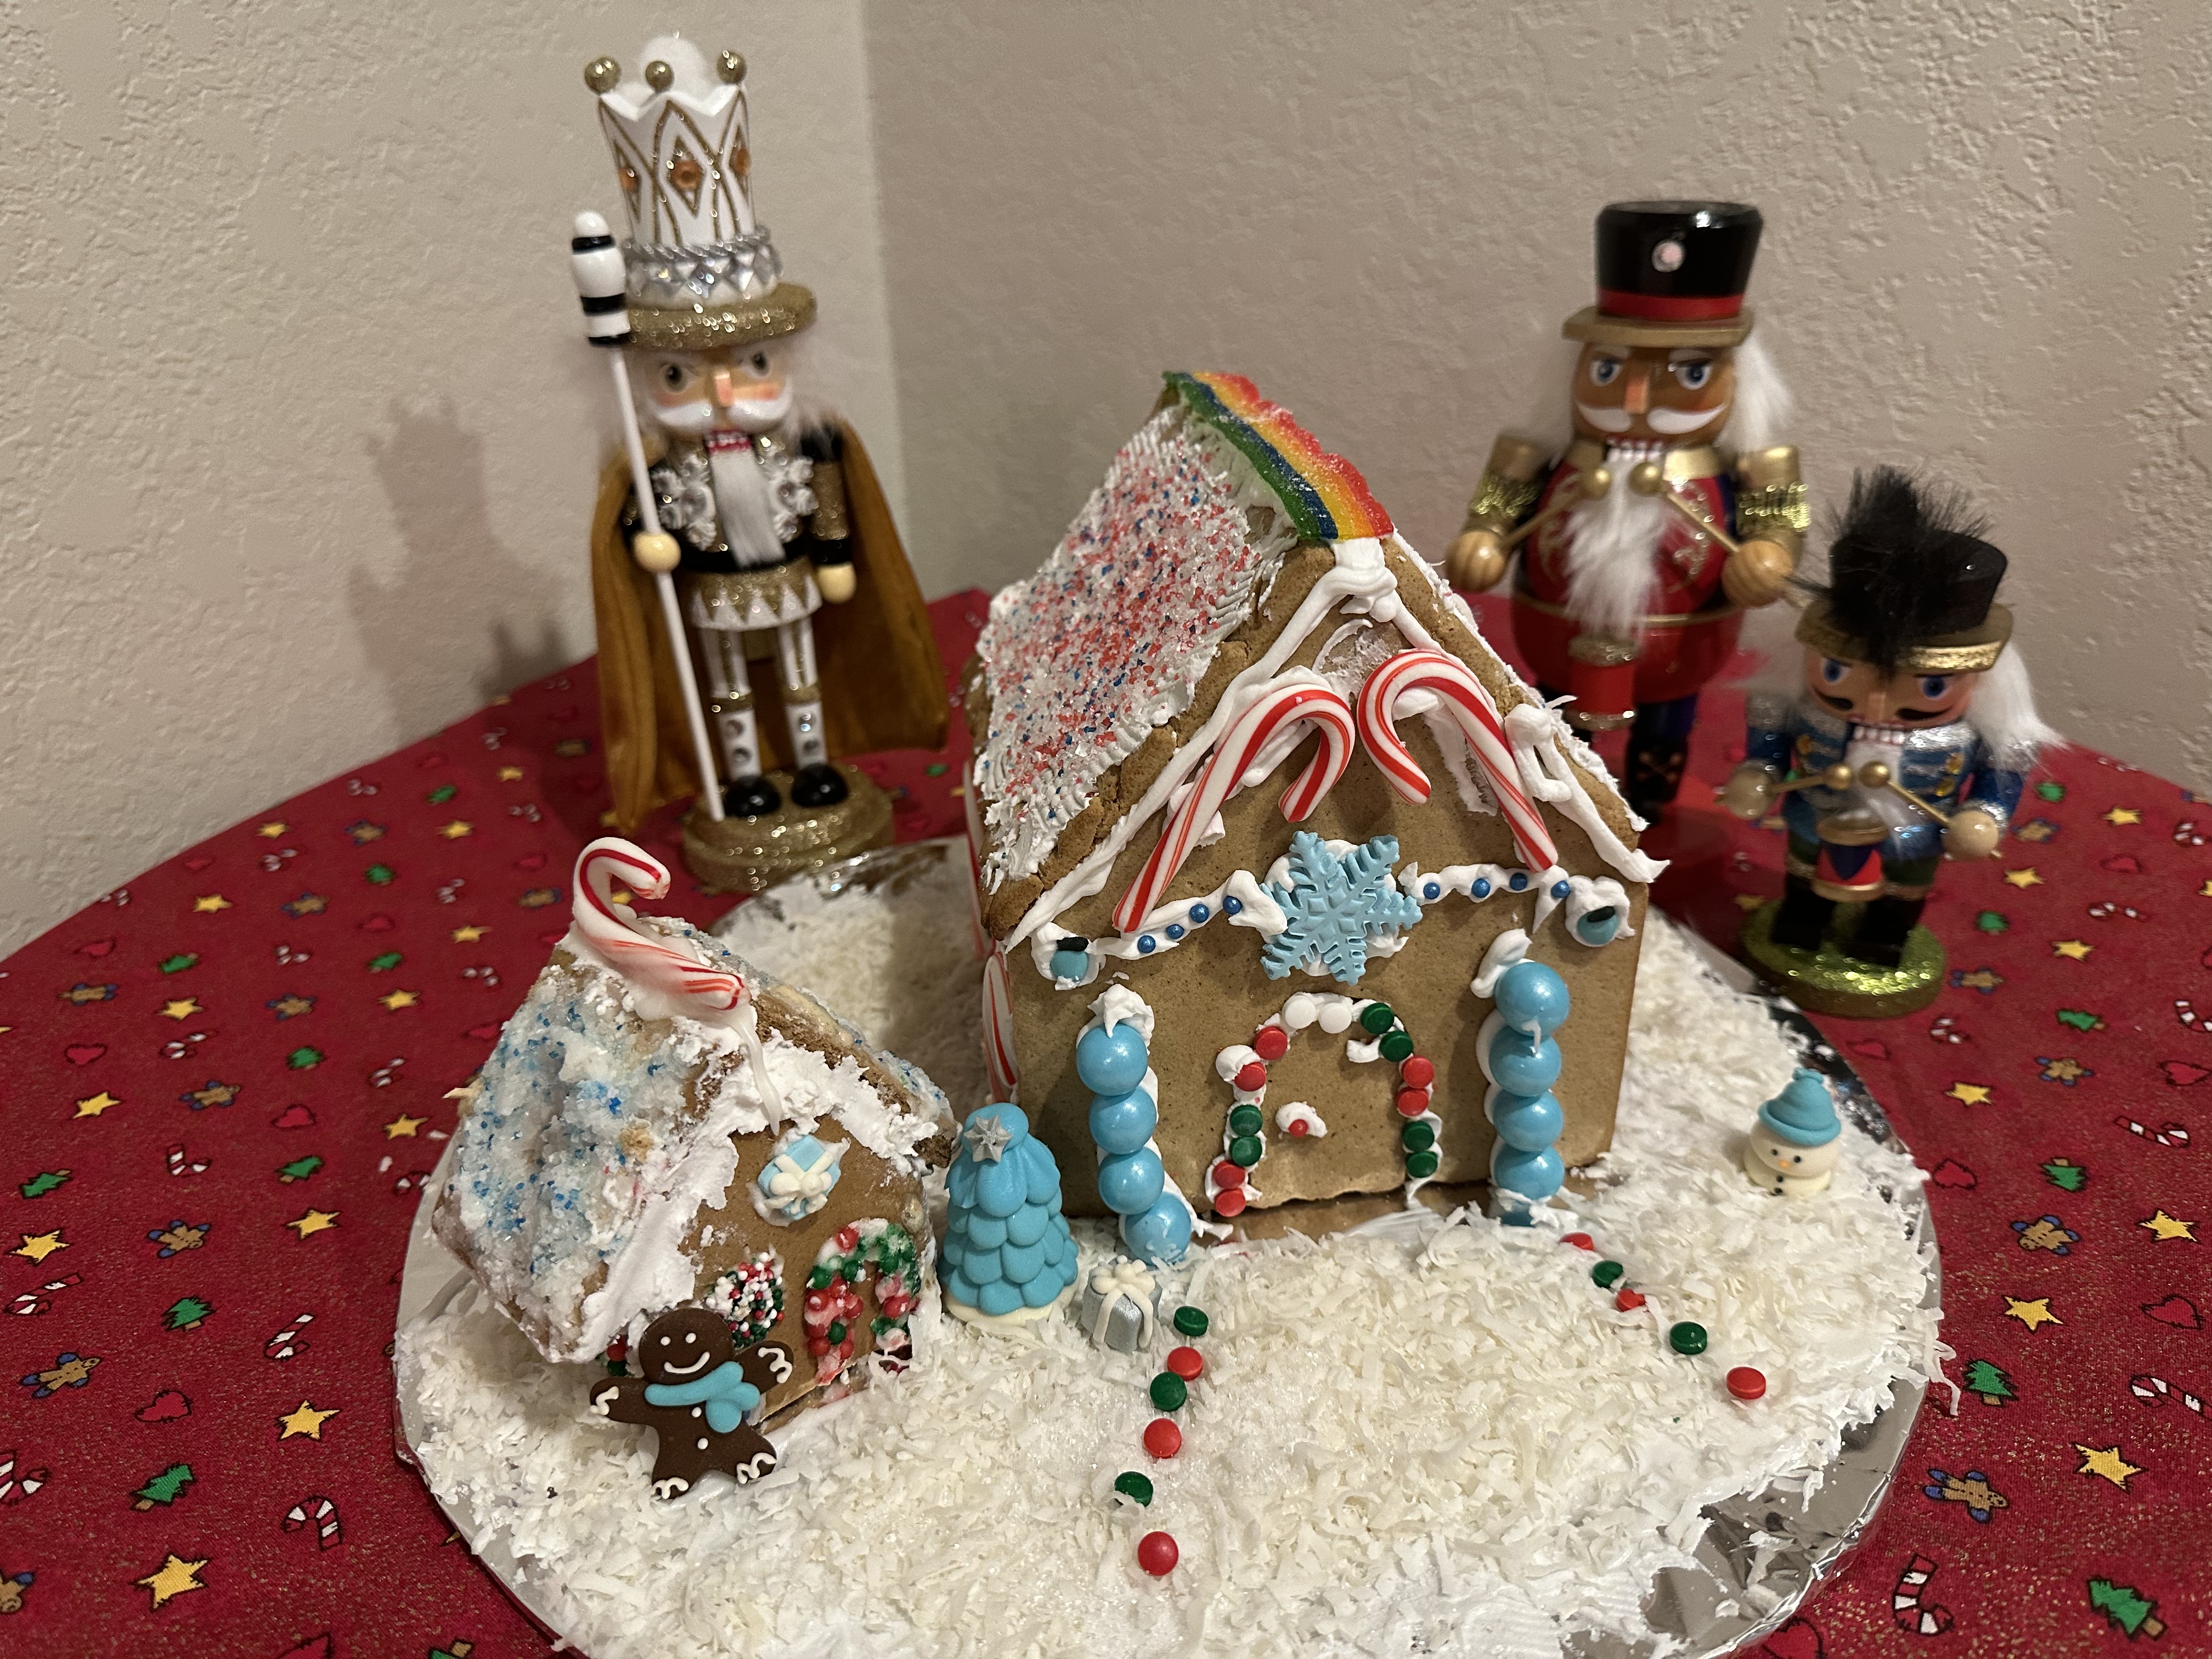 A gingerbread house and ADU sit in front of nutcrackers on a red table.